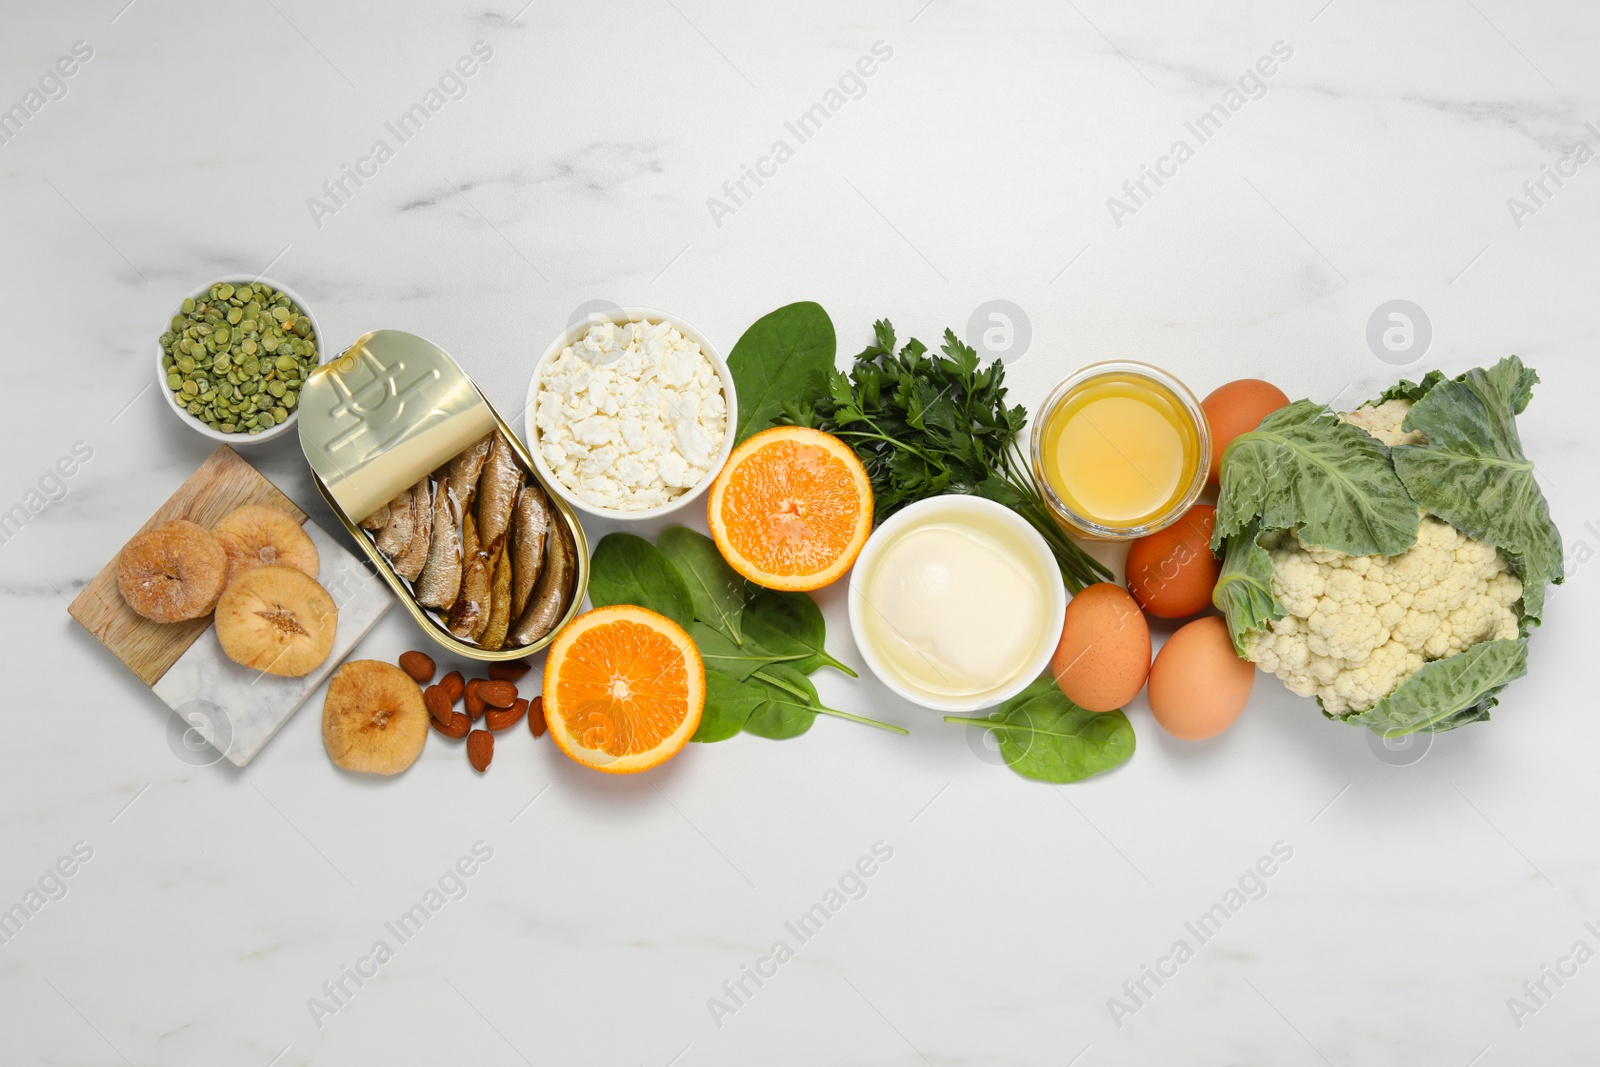 Photo of Set of natural food high in calcium on white marble table, flat lay